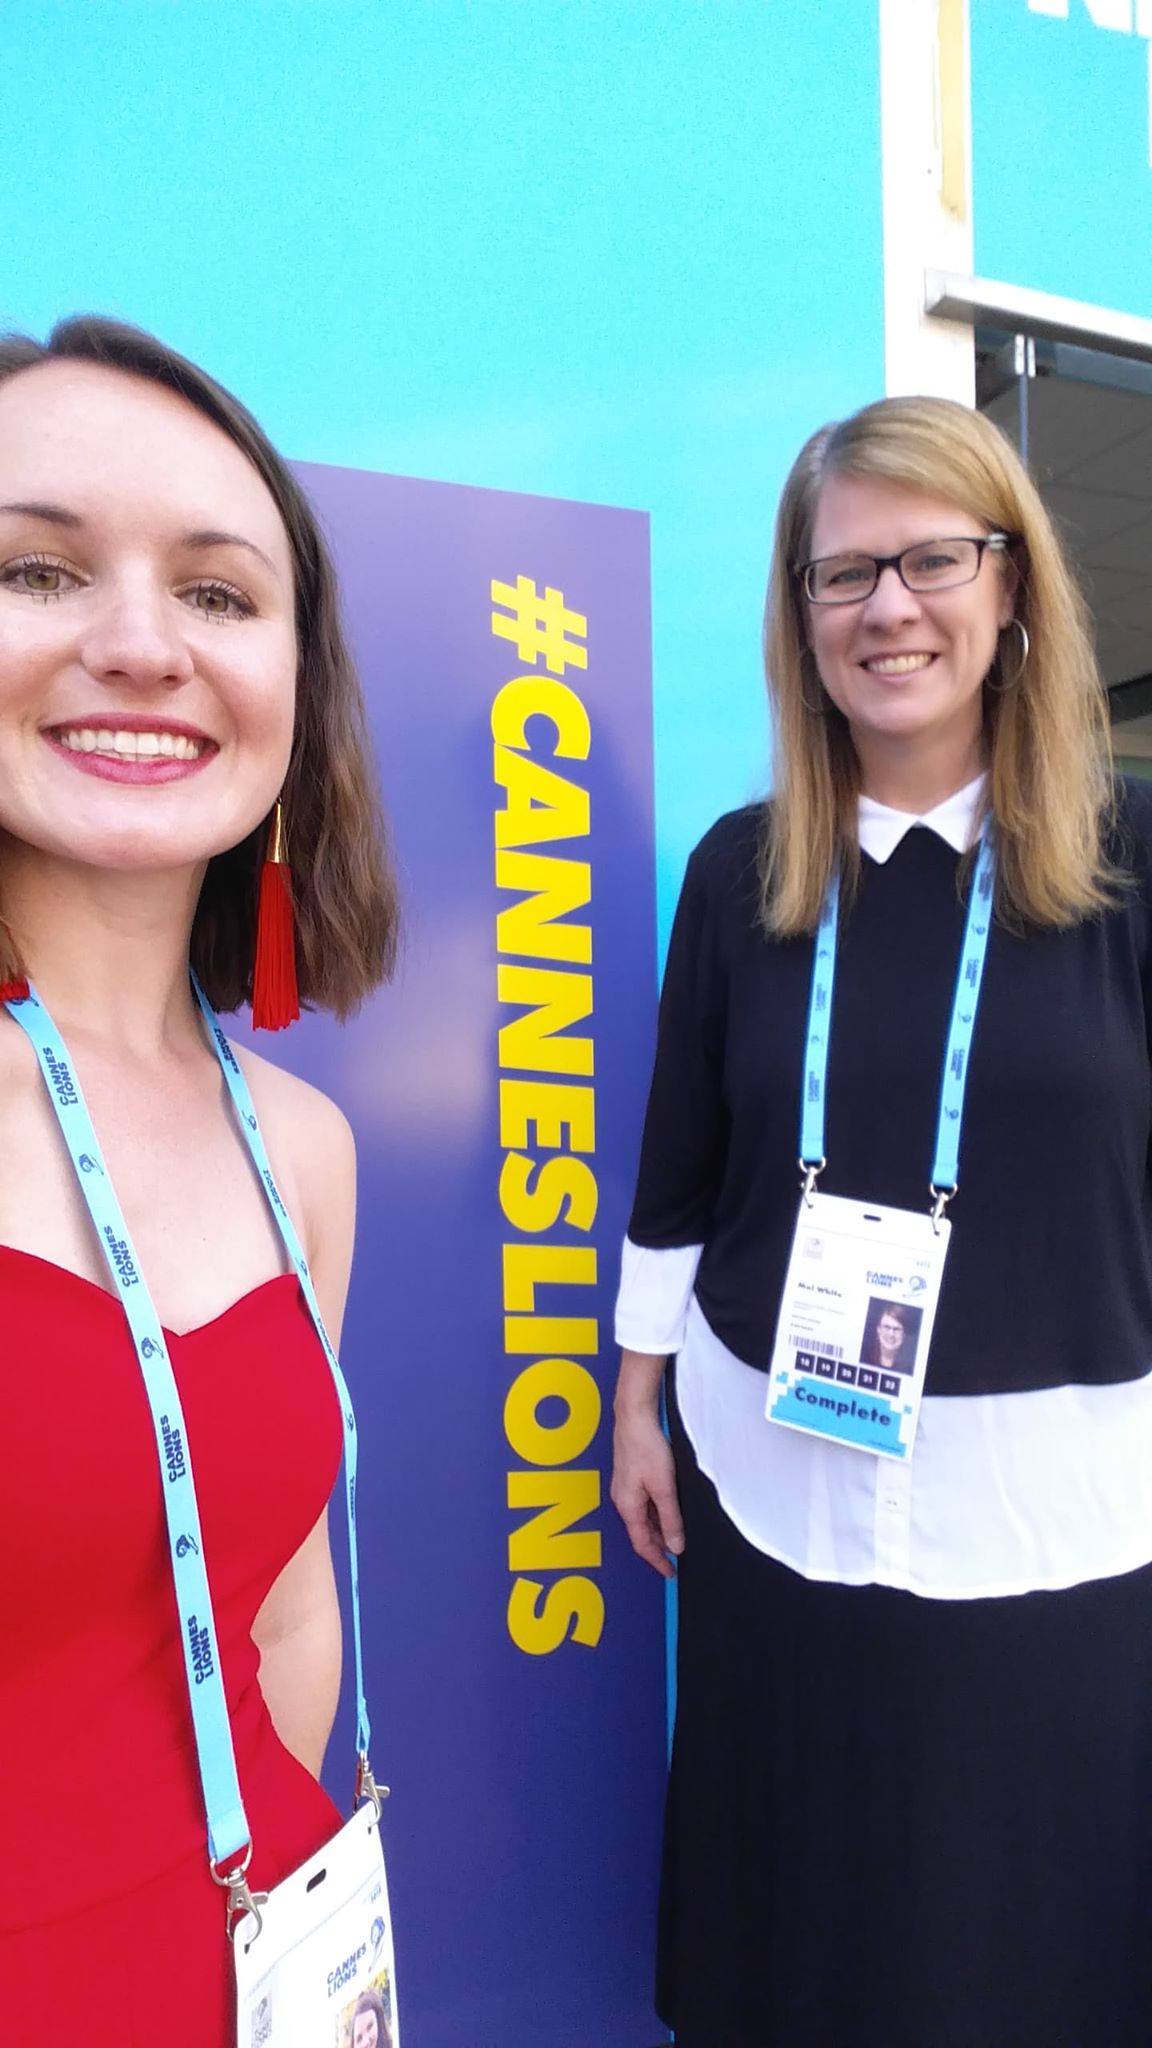 Two people take a selfie in front of a sign that says #CannesLions